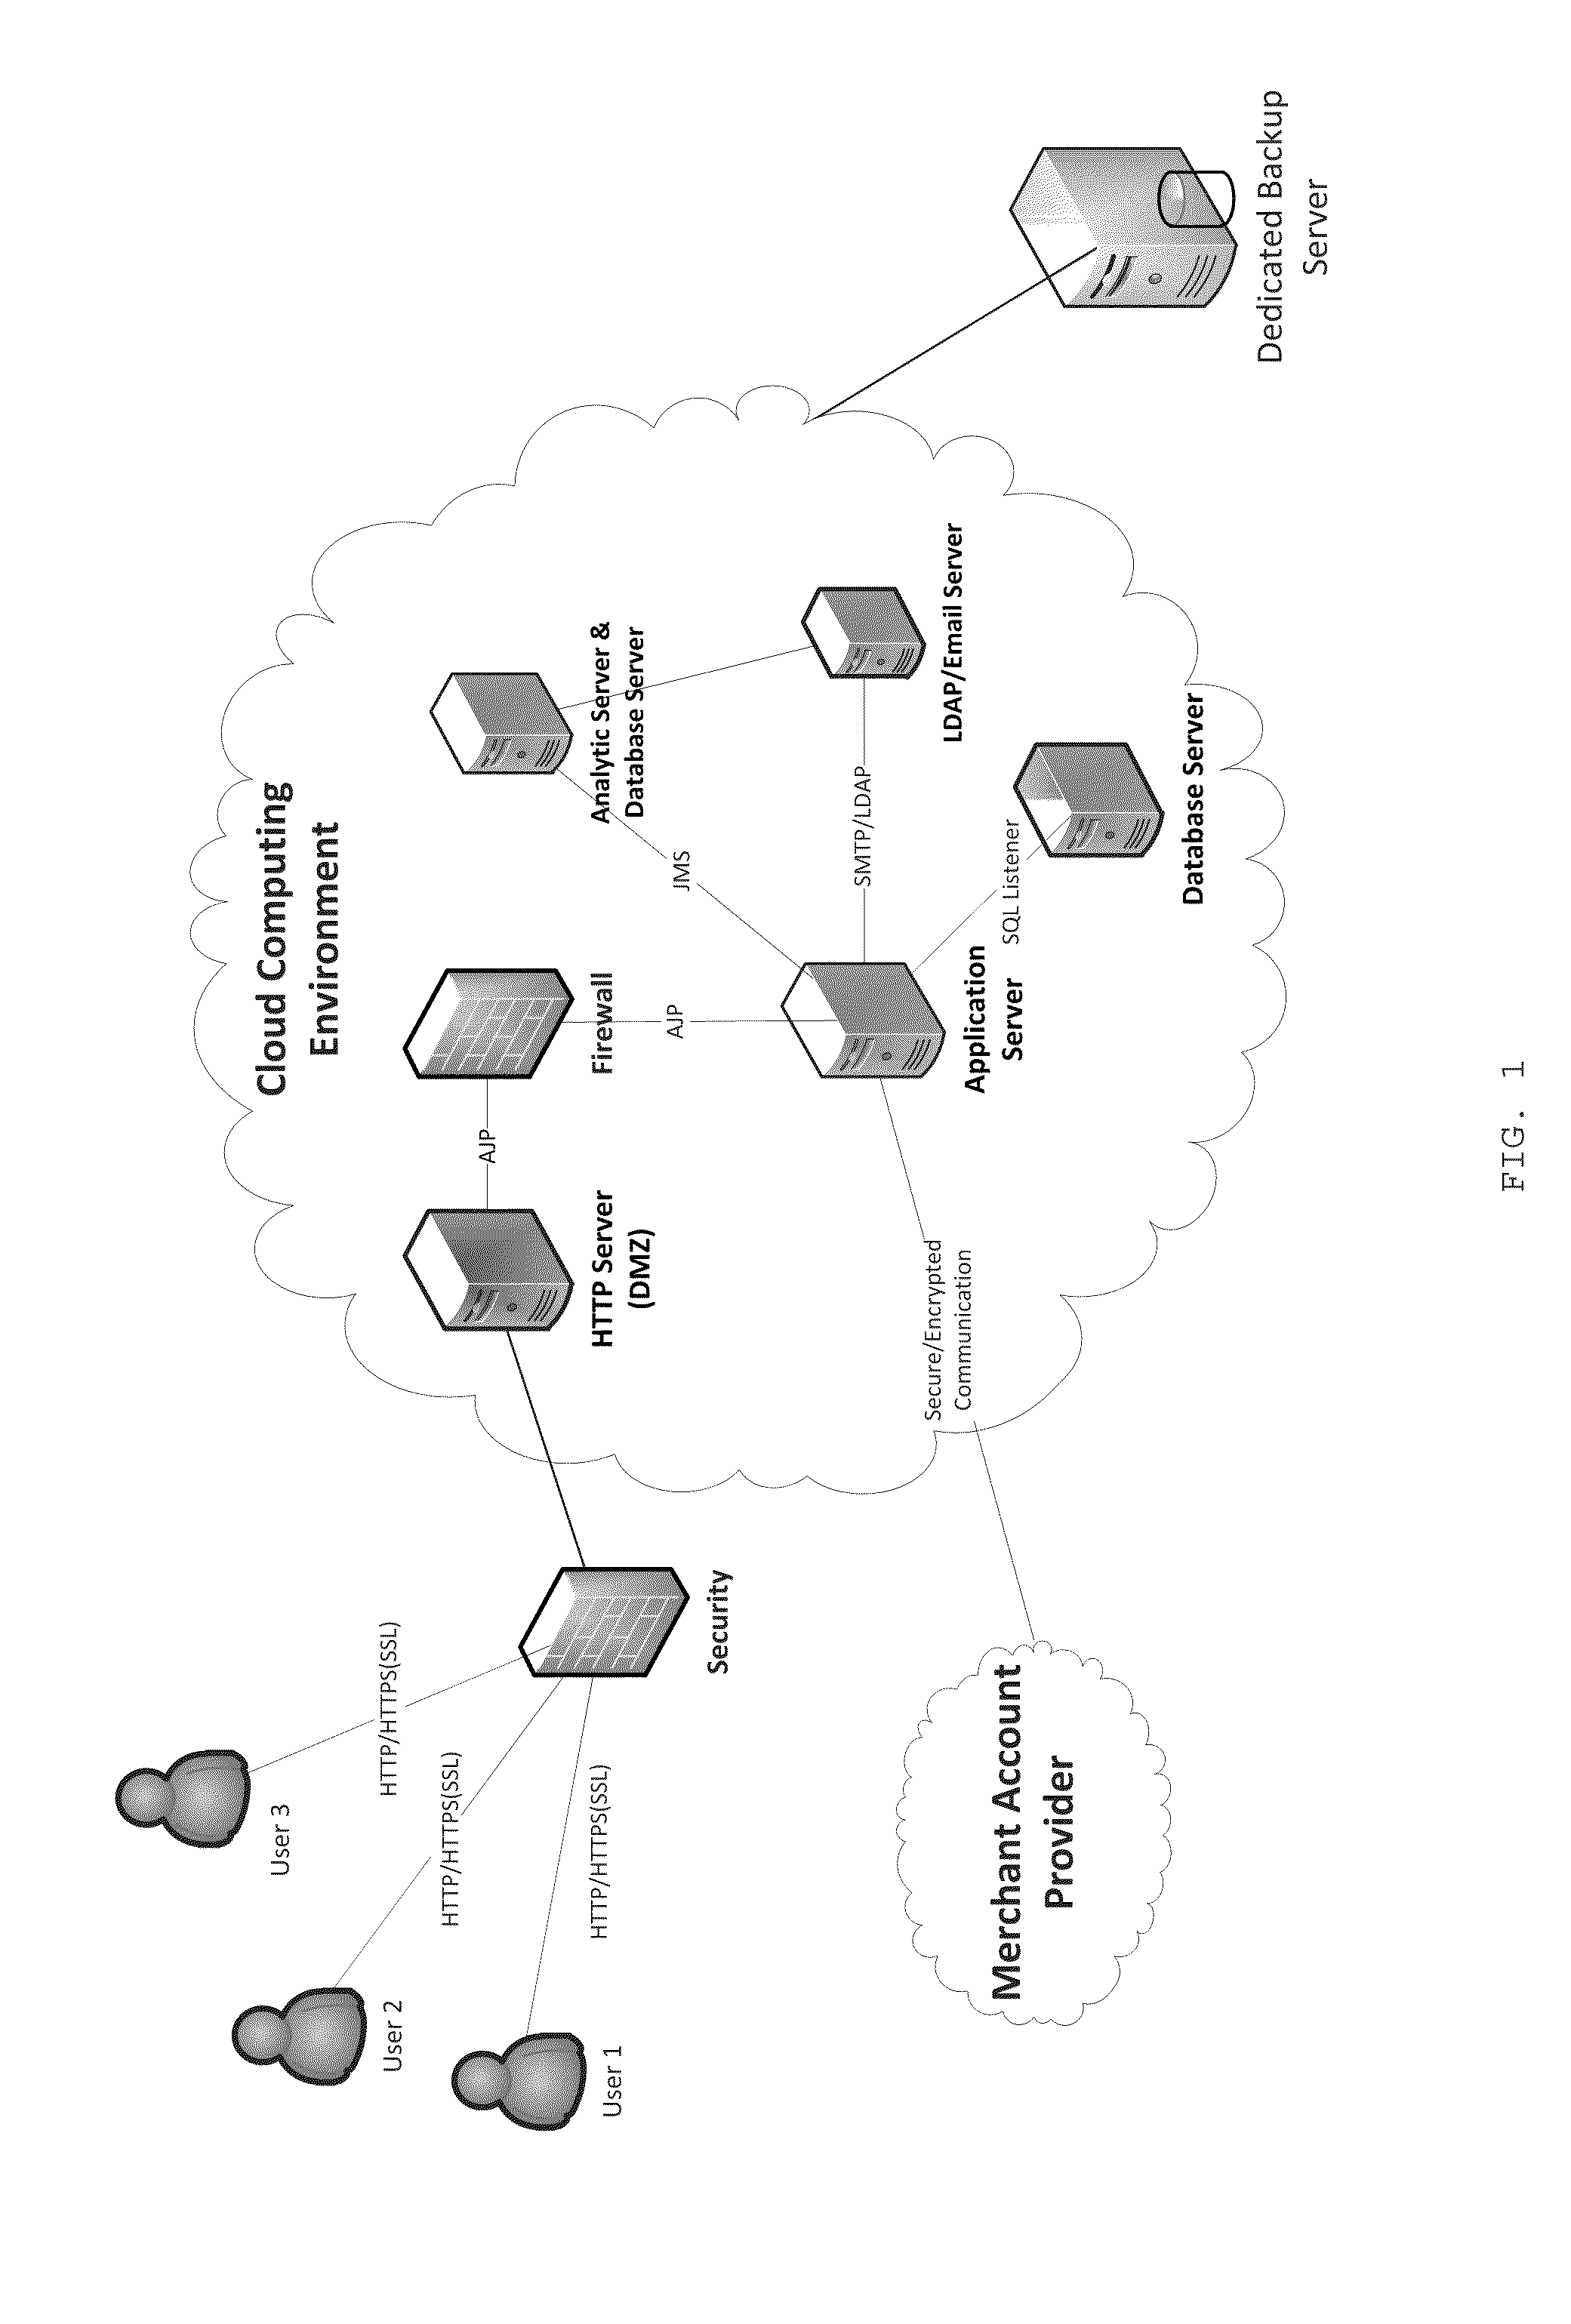 Method of delivering decision suport systems (DSS) and electronic health records (EHR) for reproductive care, pre-conceptive care, fertility treatments, and other health conditions